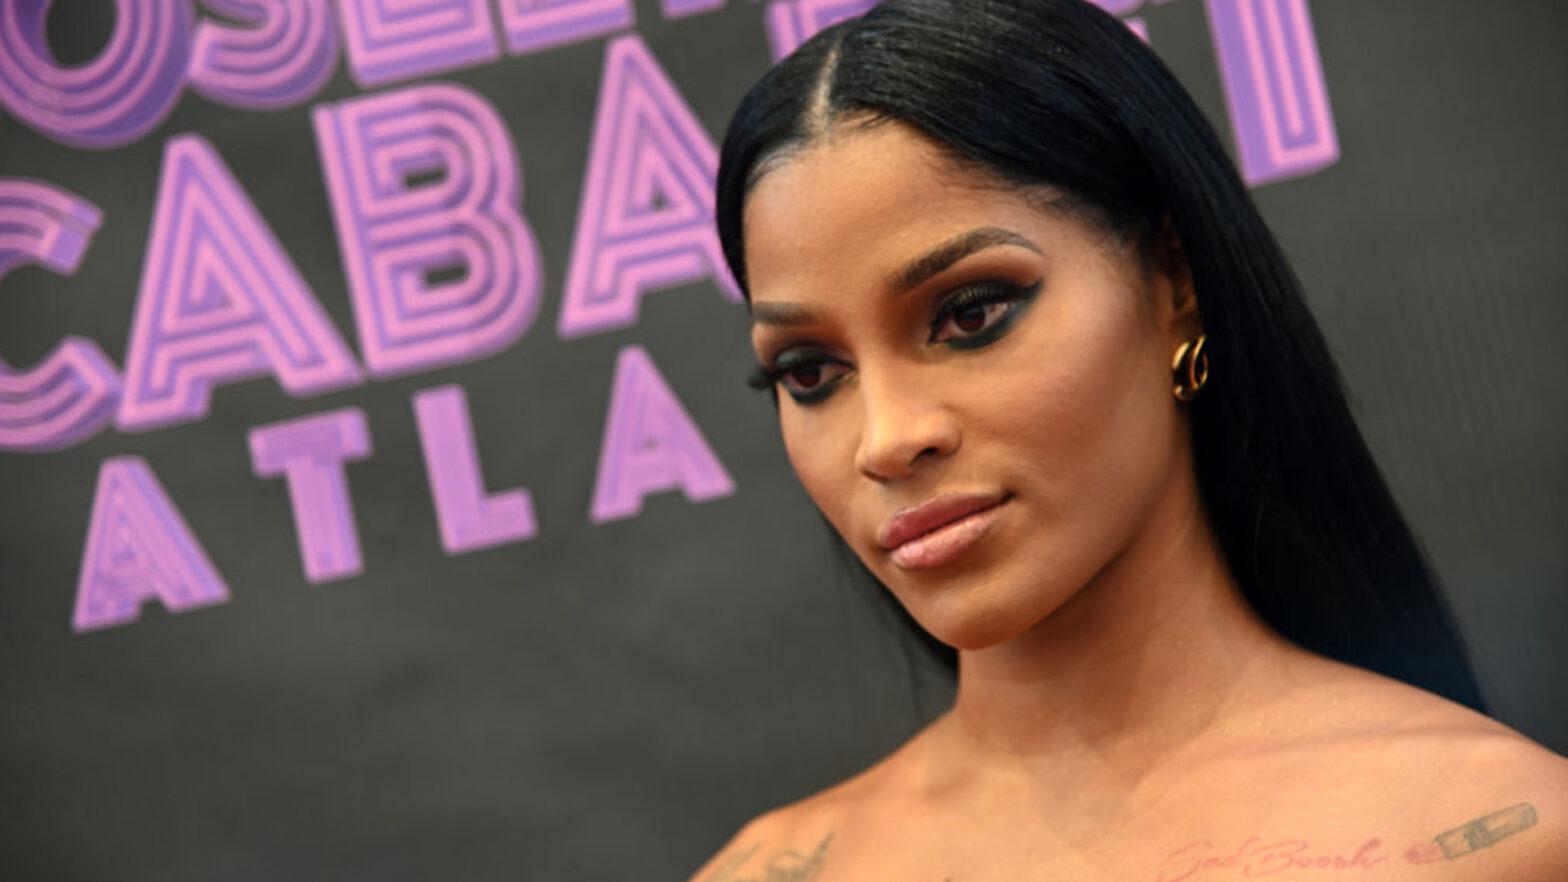 Joseline Hernandez Reflects On Making VH1 'Billions Of Dollars' And Having Ownership In Her Deal With Zeus Network